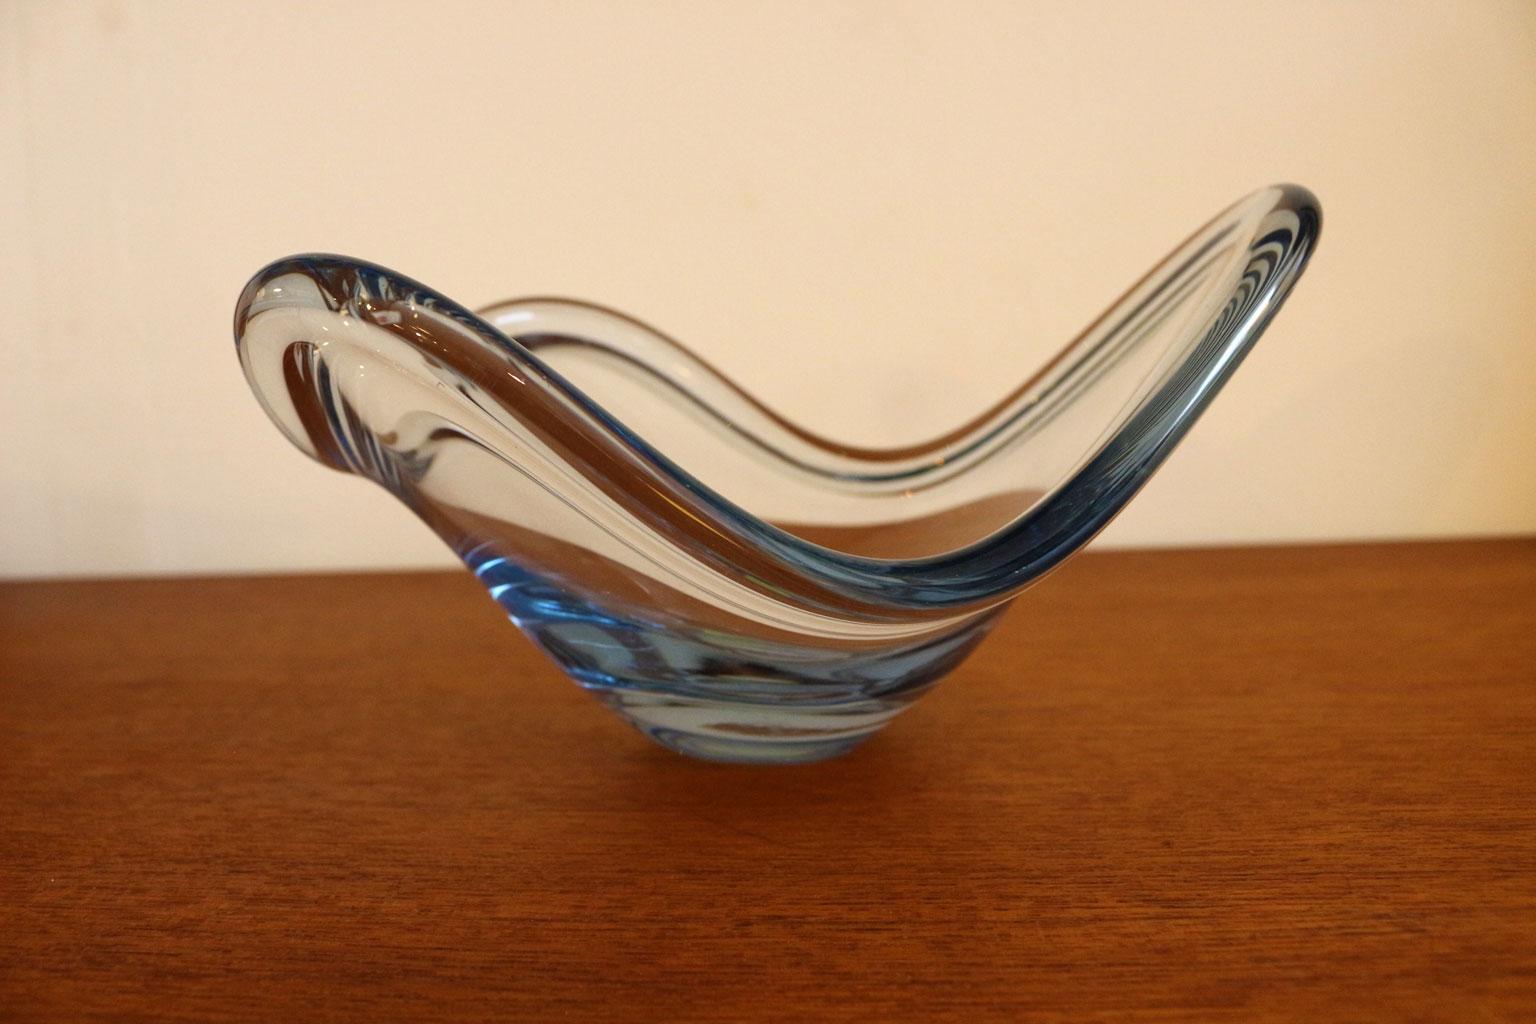 Oblong and irregular in shape this coveted Holmegaard 3 Swoop Dish is made of blown glass and has the faintest sky blue tint. A quality piece of decorative midcentury glass that would look great displayed on a coffee table or credenza.